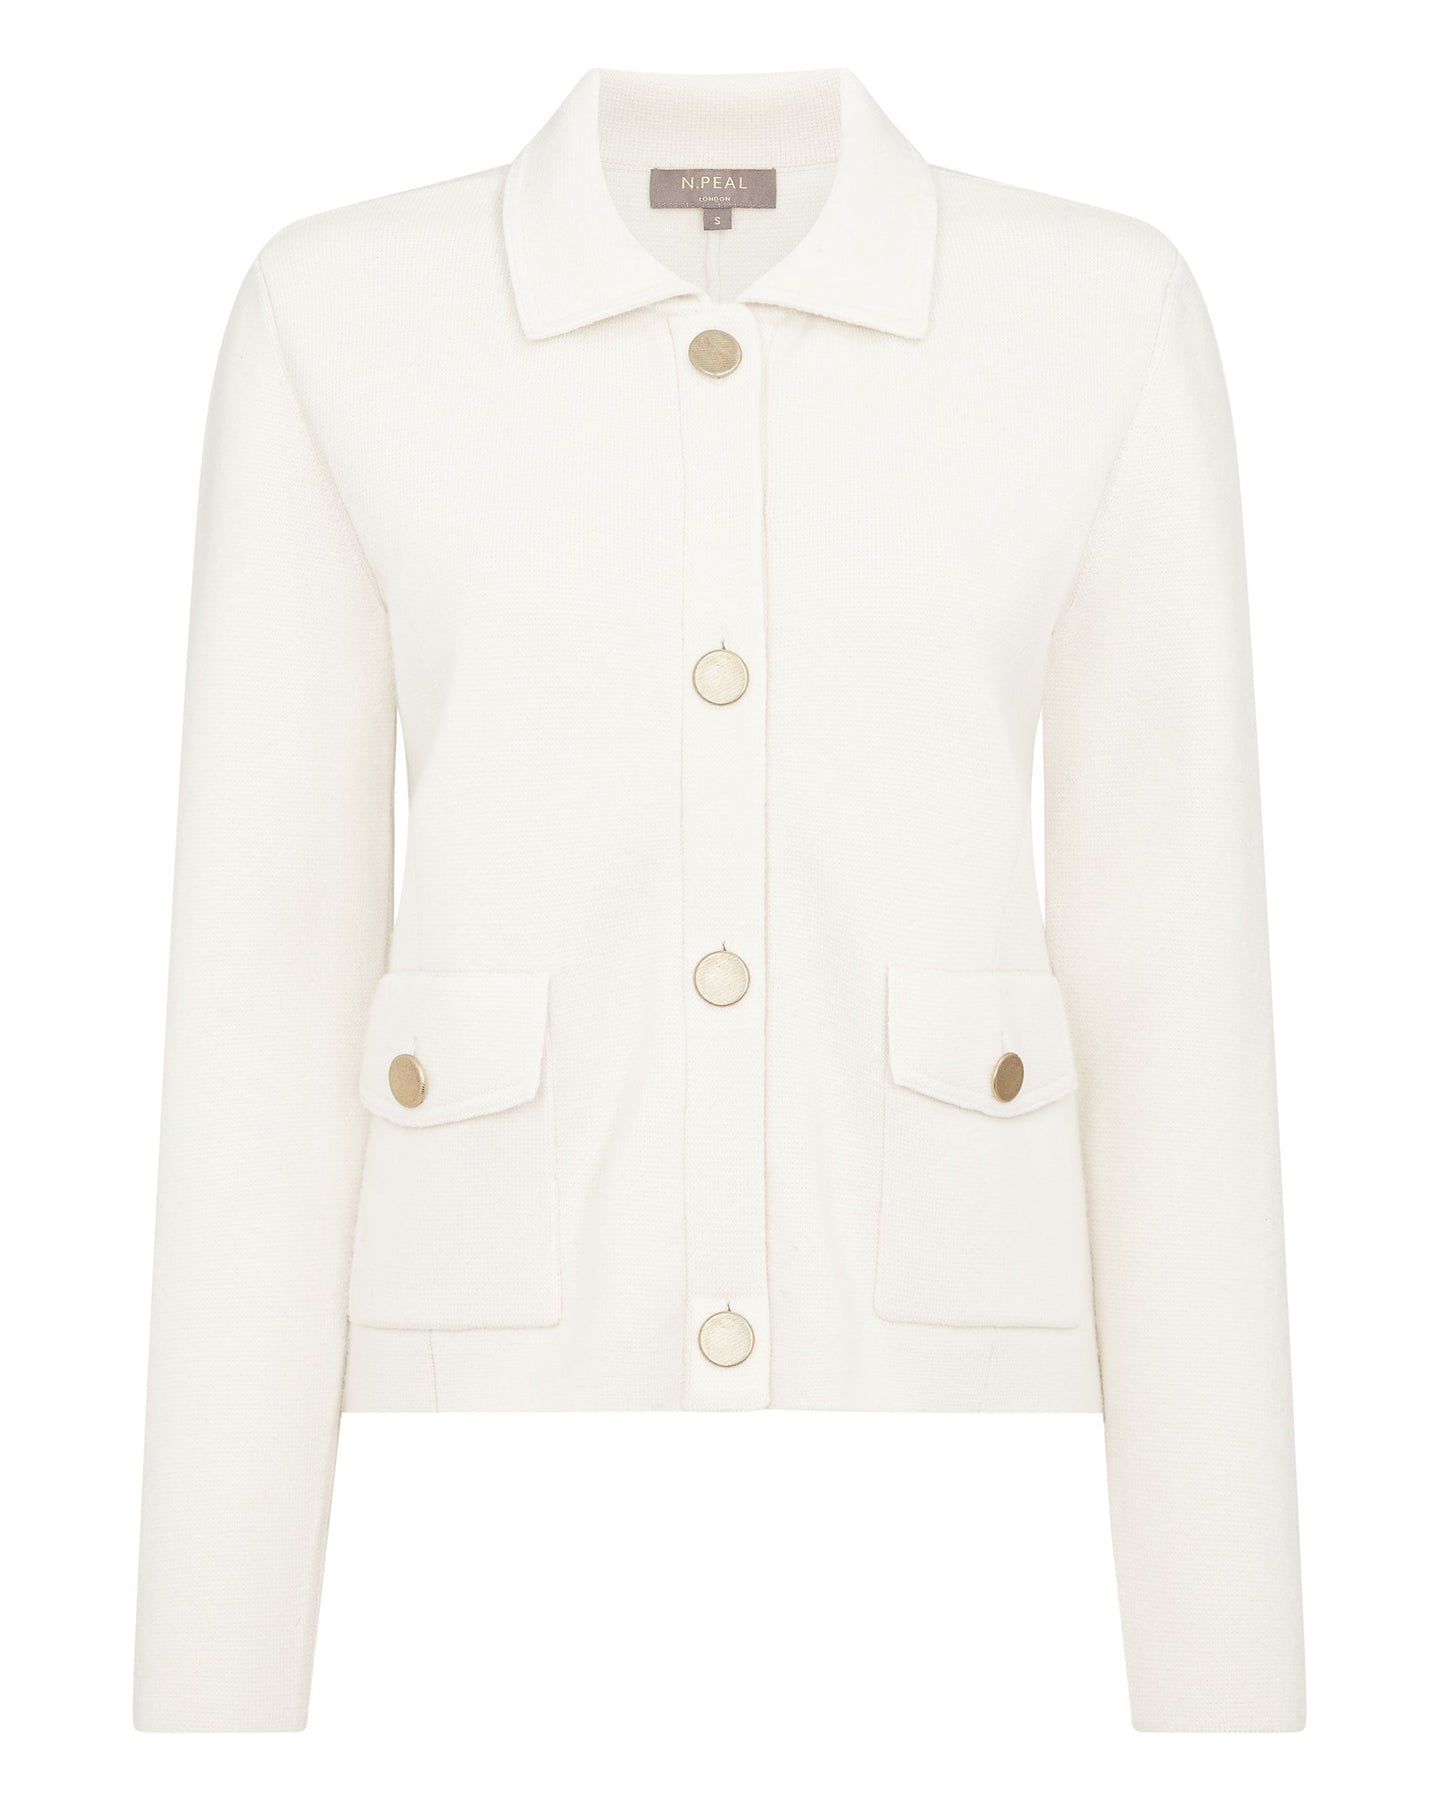 N.Peal Women's Cropped Milano Cashmere Jacket New Ivory White